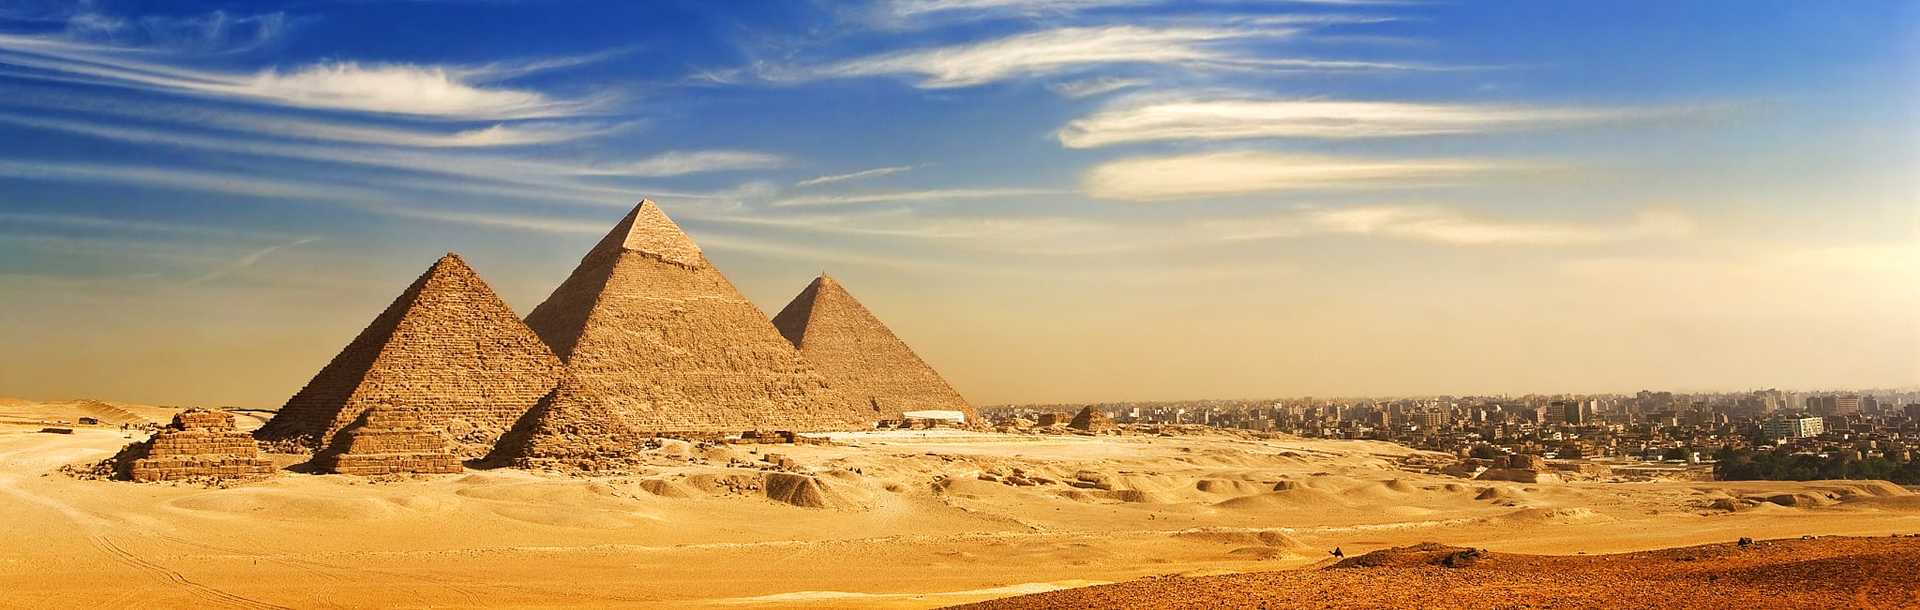 Distant view of the Great Pyramids of Giza in Egypt